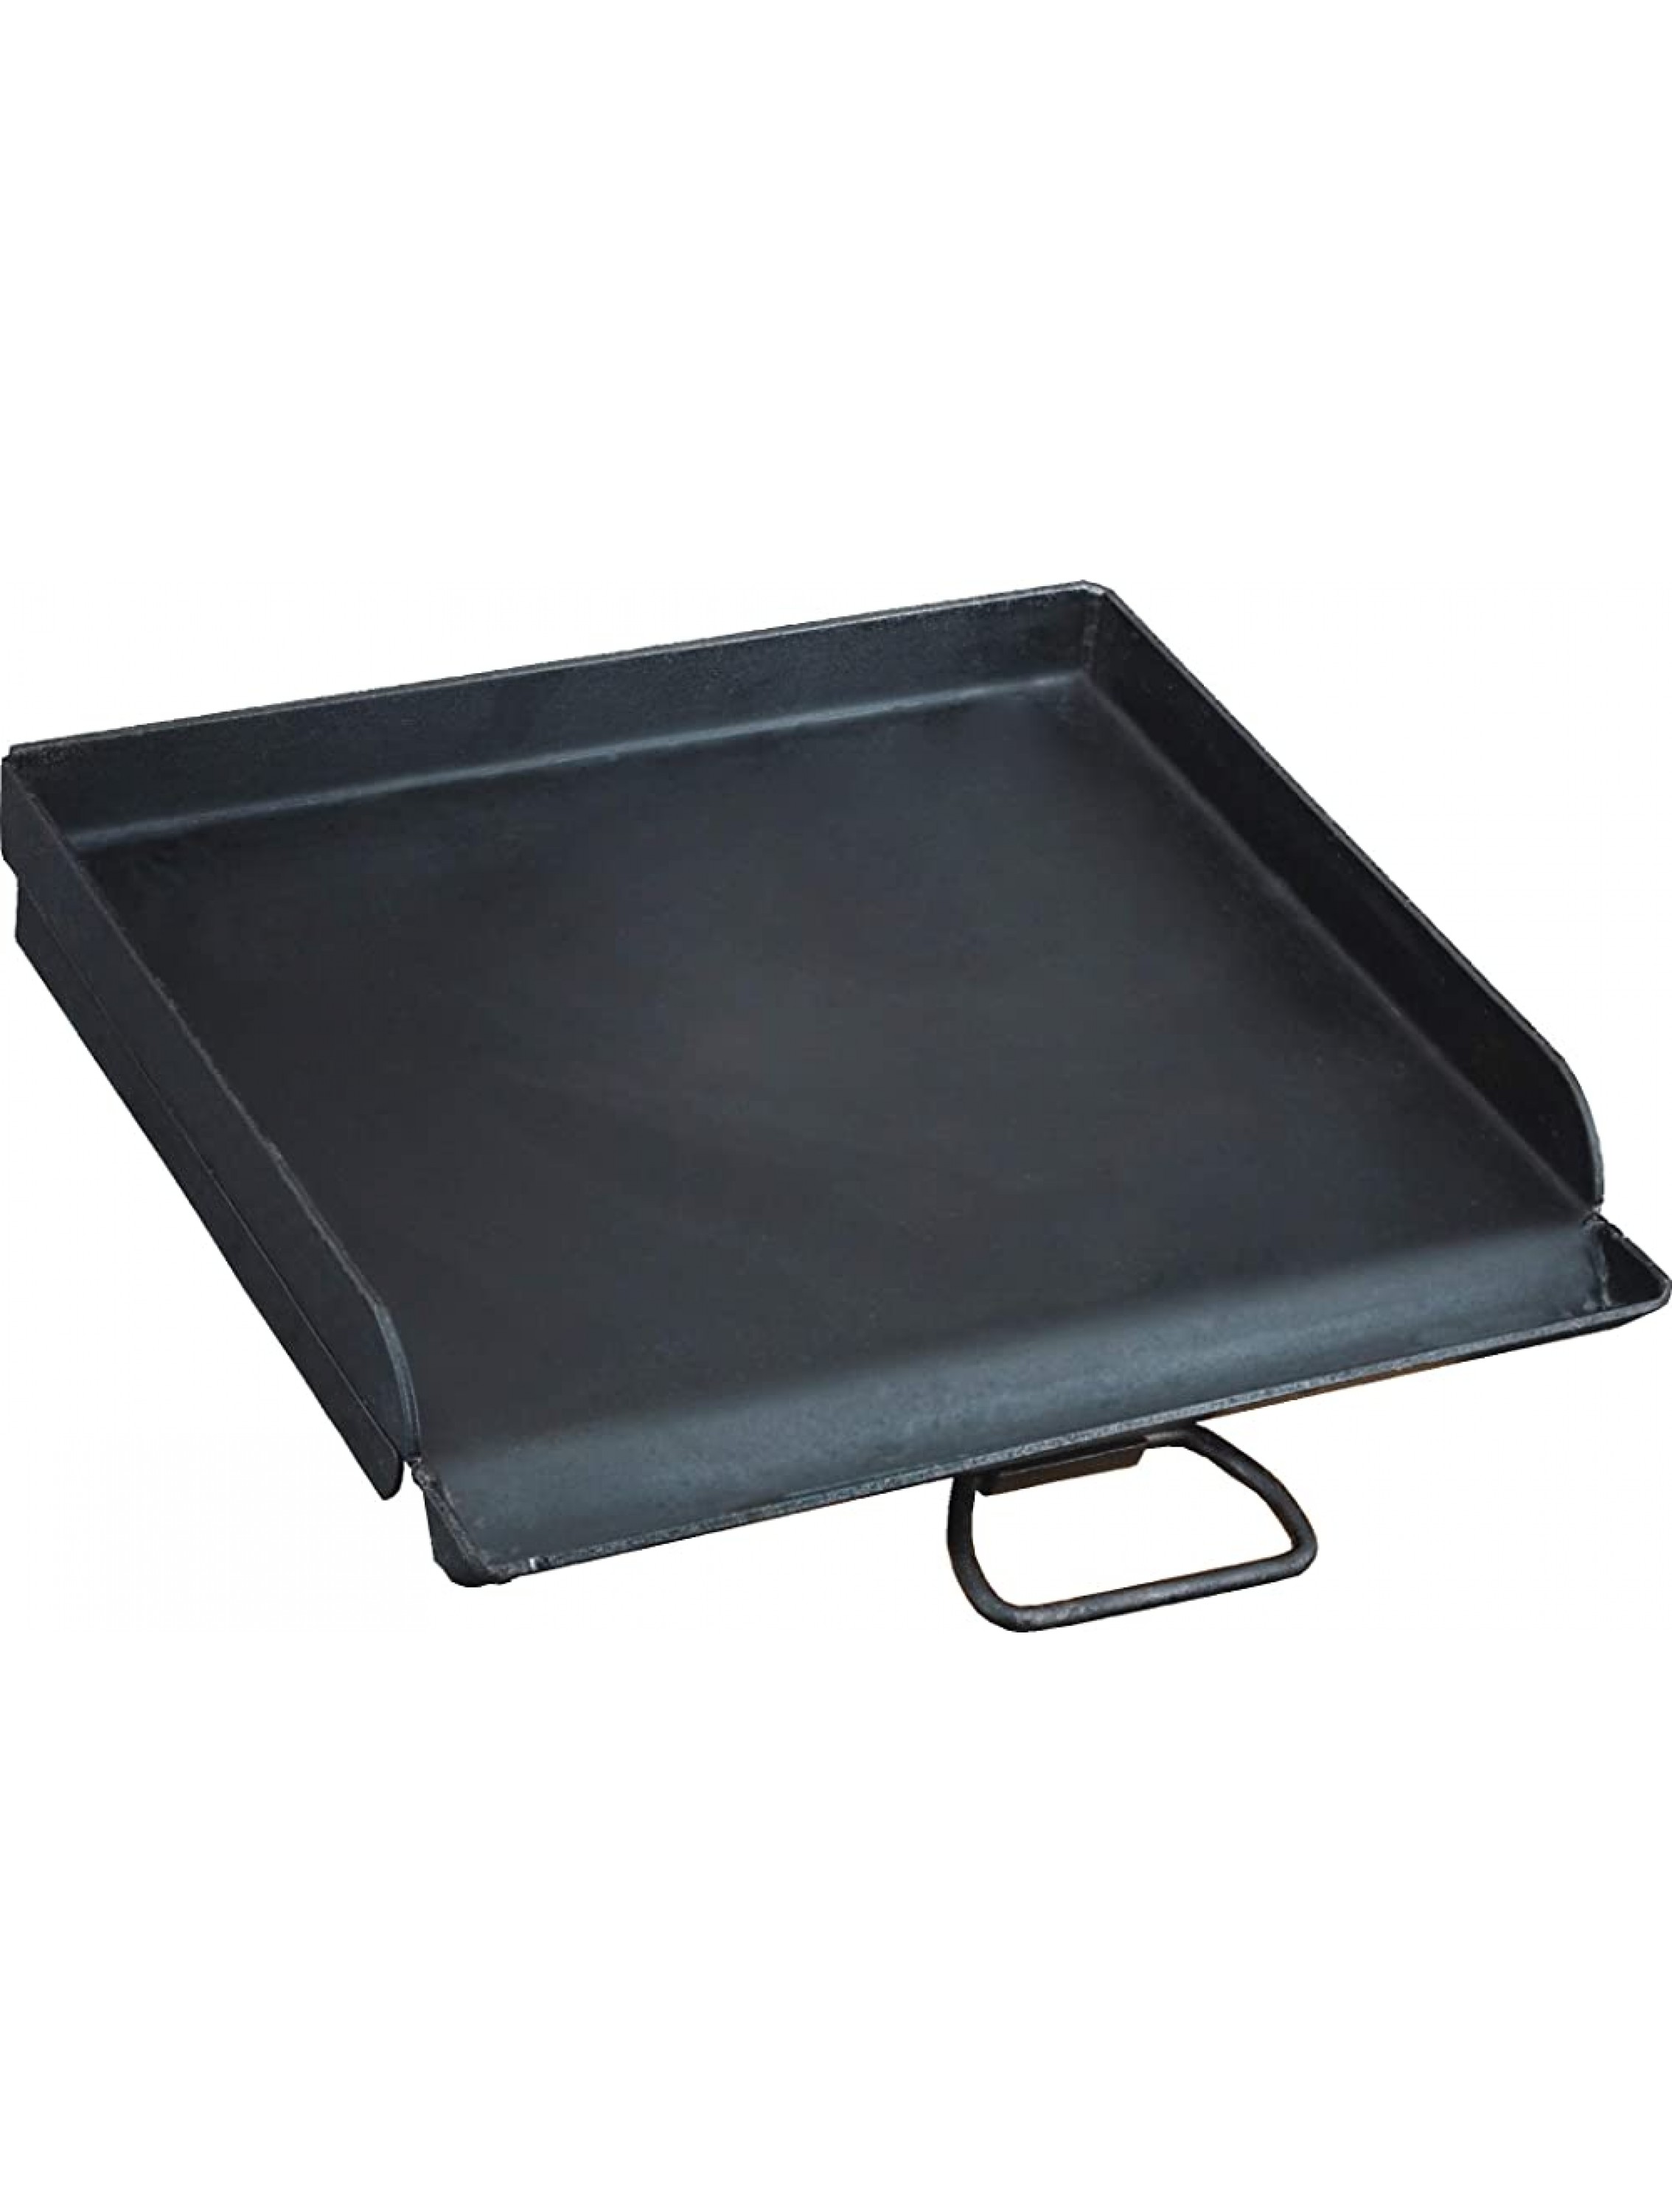 Camp Chef Professional Fry Griddle Single Burner 14 Cooking Accessory Cooking Dimensions: 14 in. x 16 in - B0HJ8OYVO